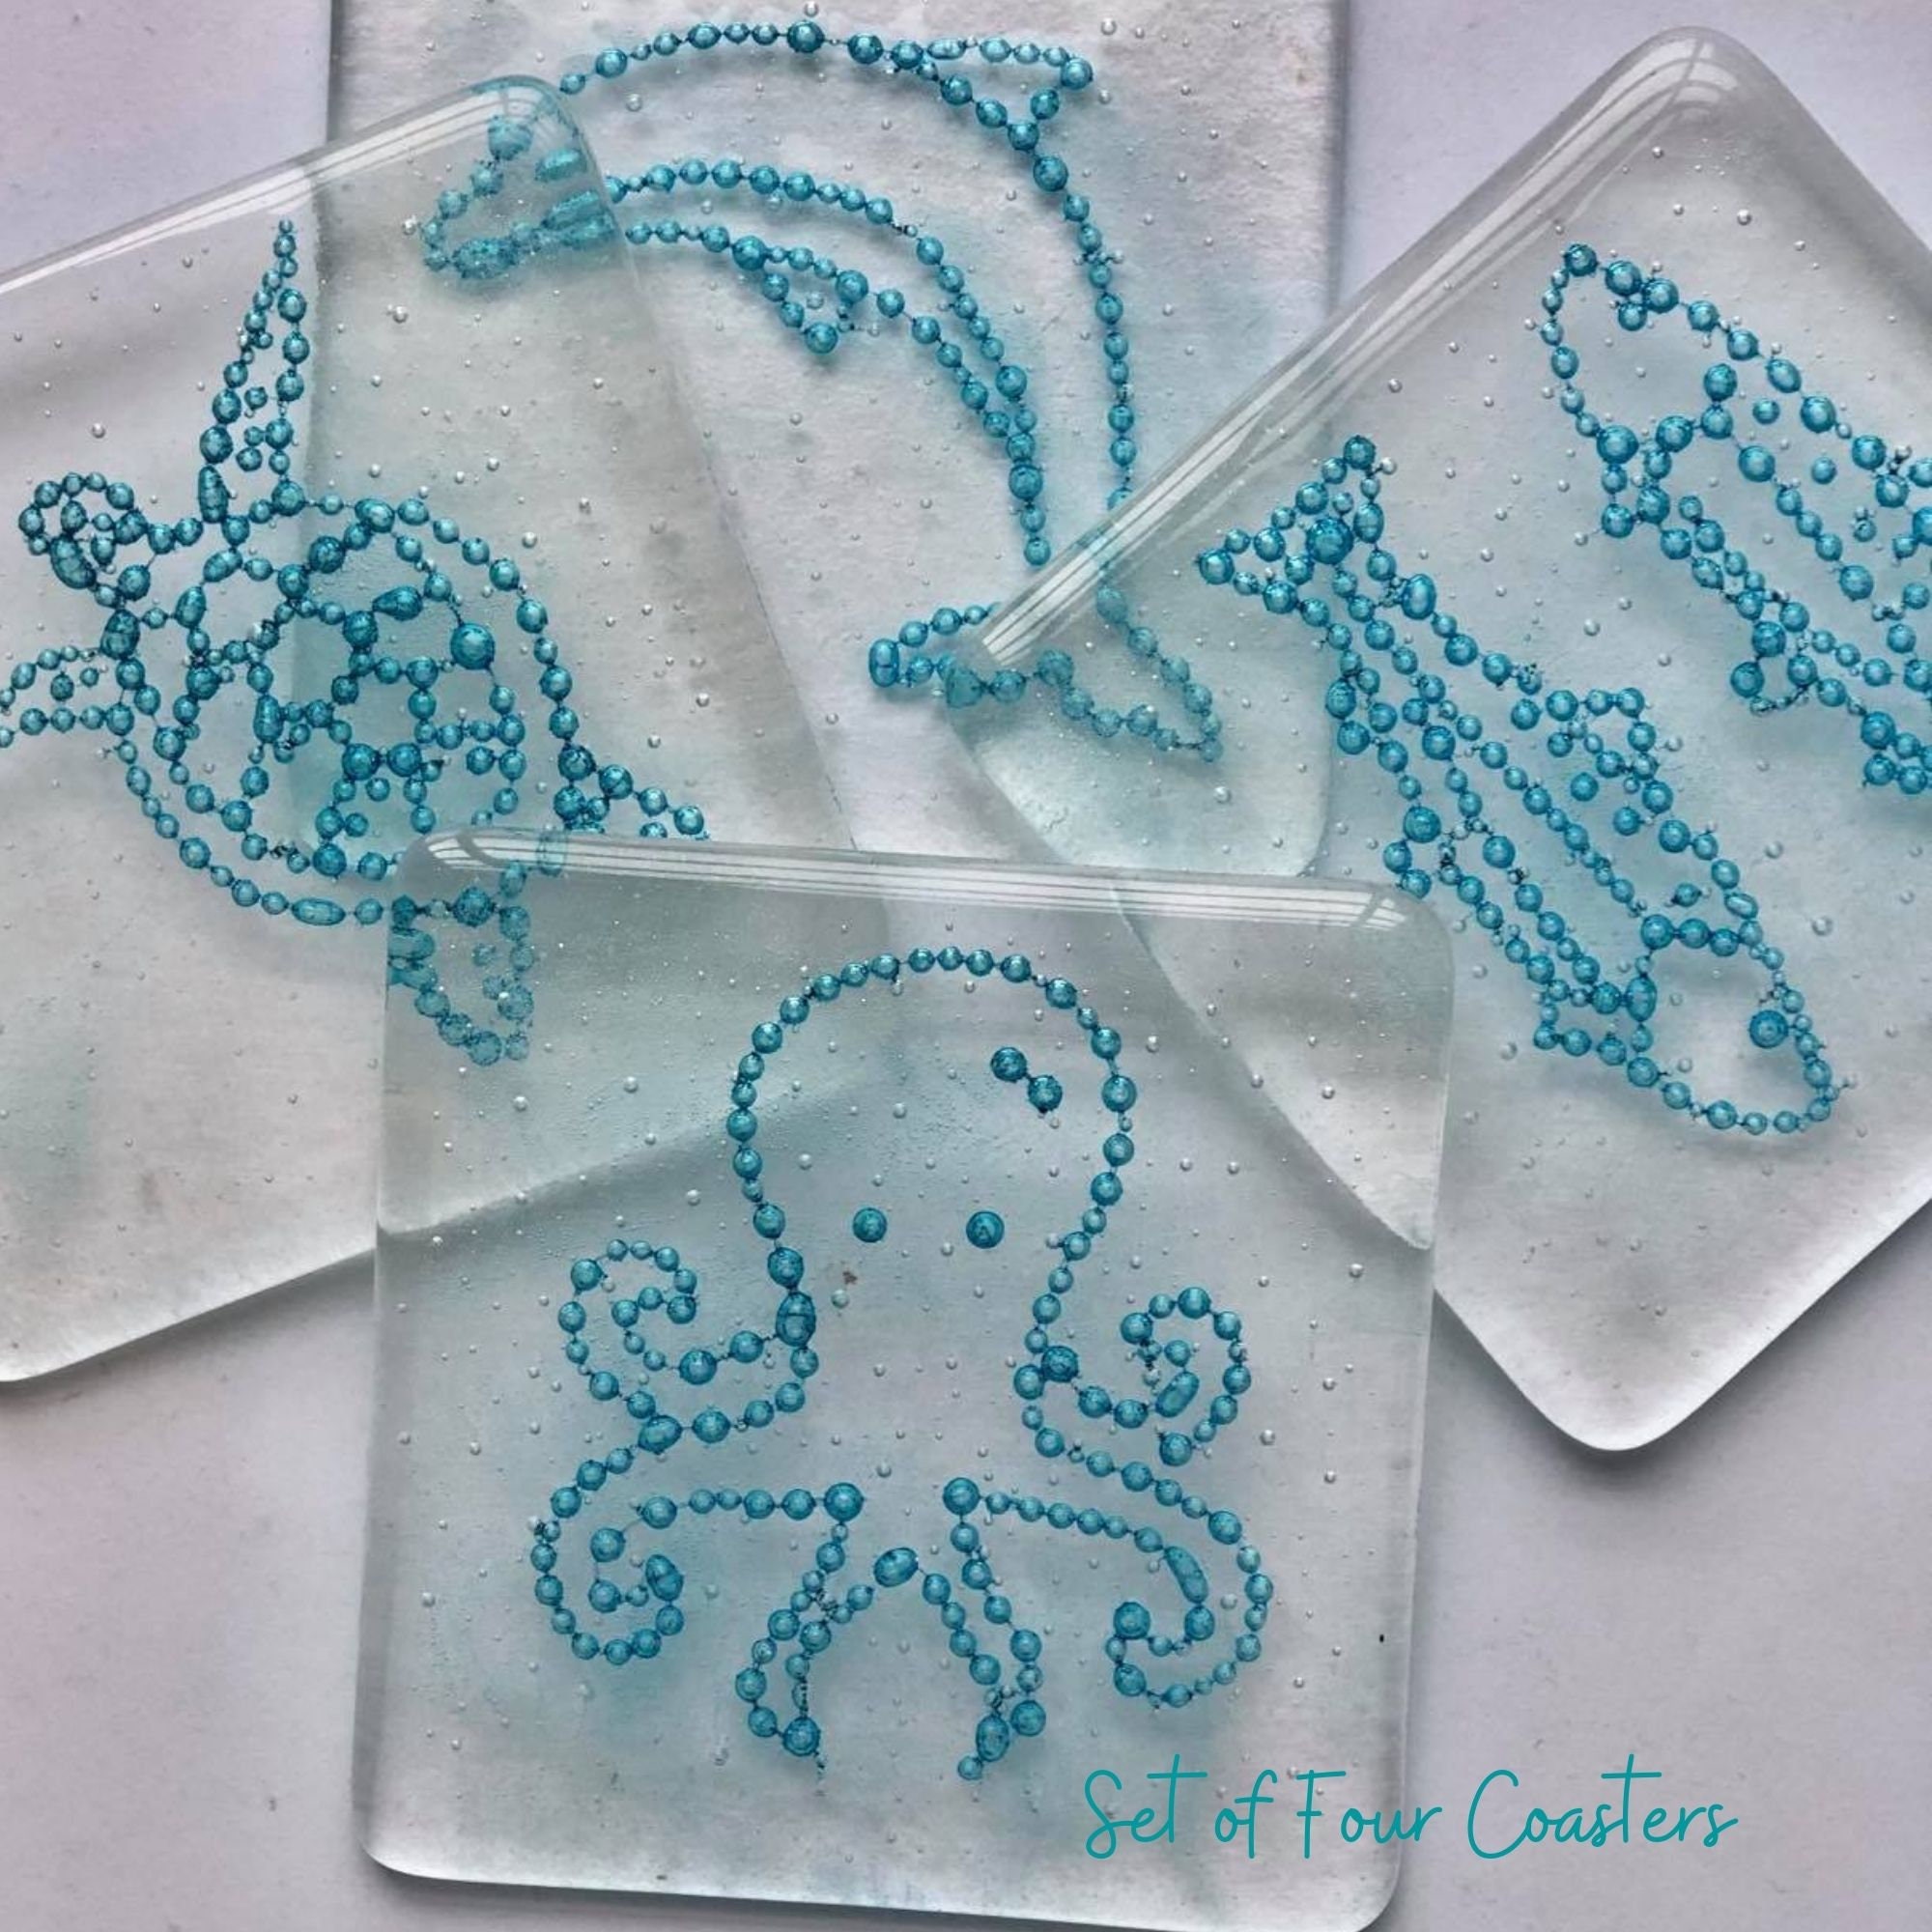 Octopus Home Decor Sea Coaster 4.13 inch 6 Octopus Coasters for Drinks Coastal Octopus Gift Farmhouse Nautical Solid Absorbent Beach Beige Ceramic Coasters 